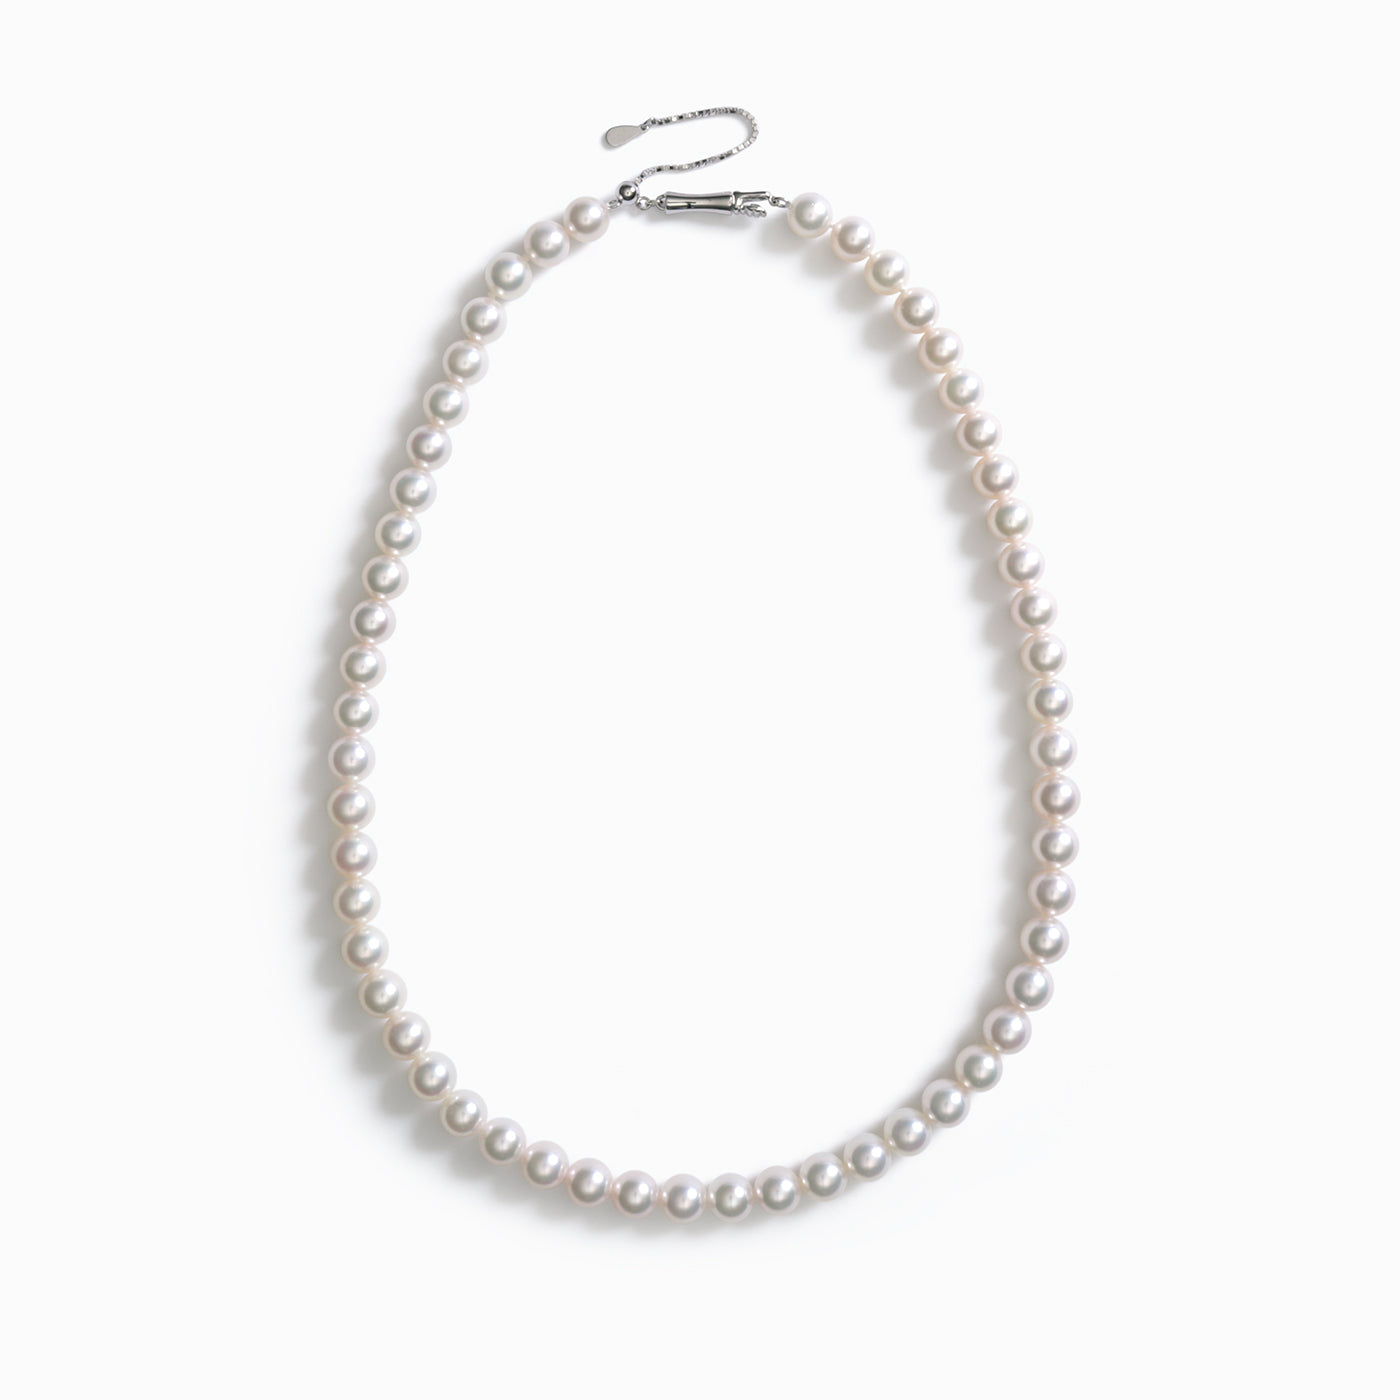 White Japanese Akoya Pearl Necklace, 9.0-9.5mm - AAA Quality - Pure Pearls